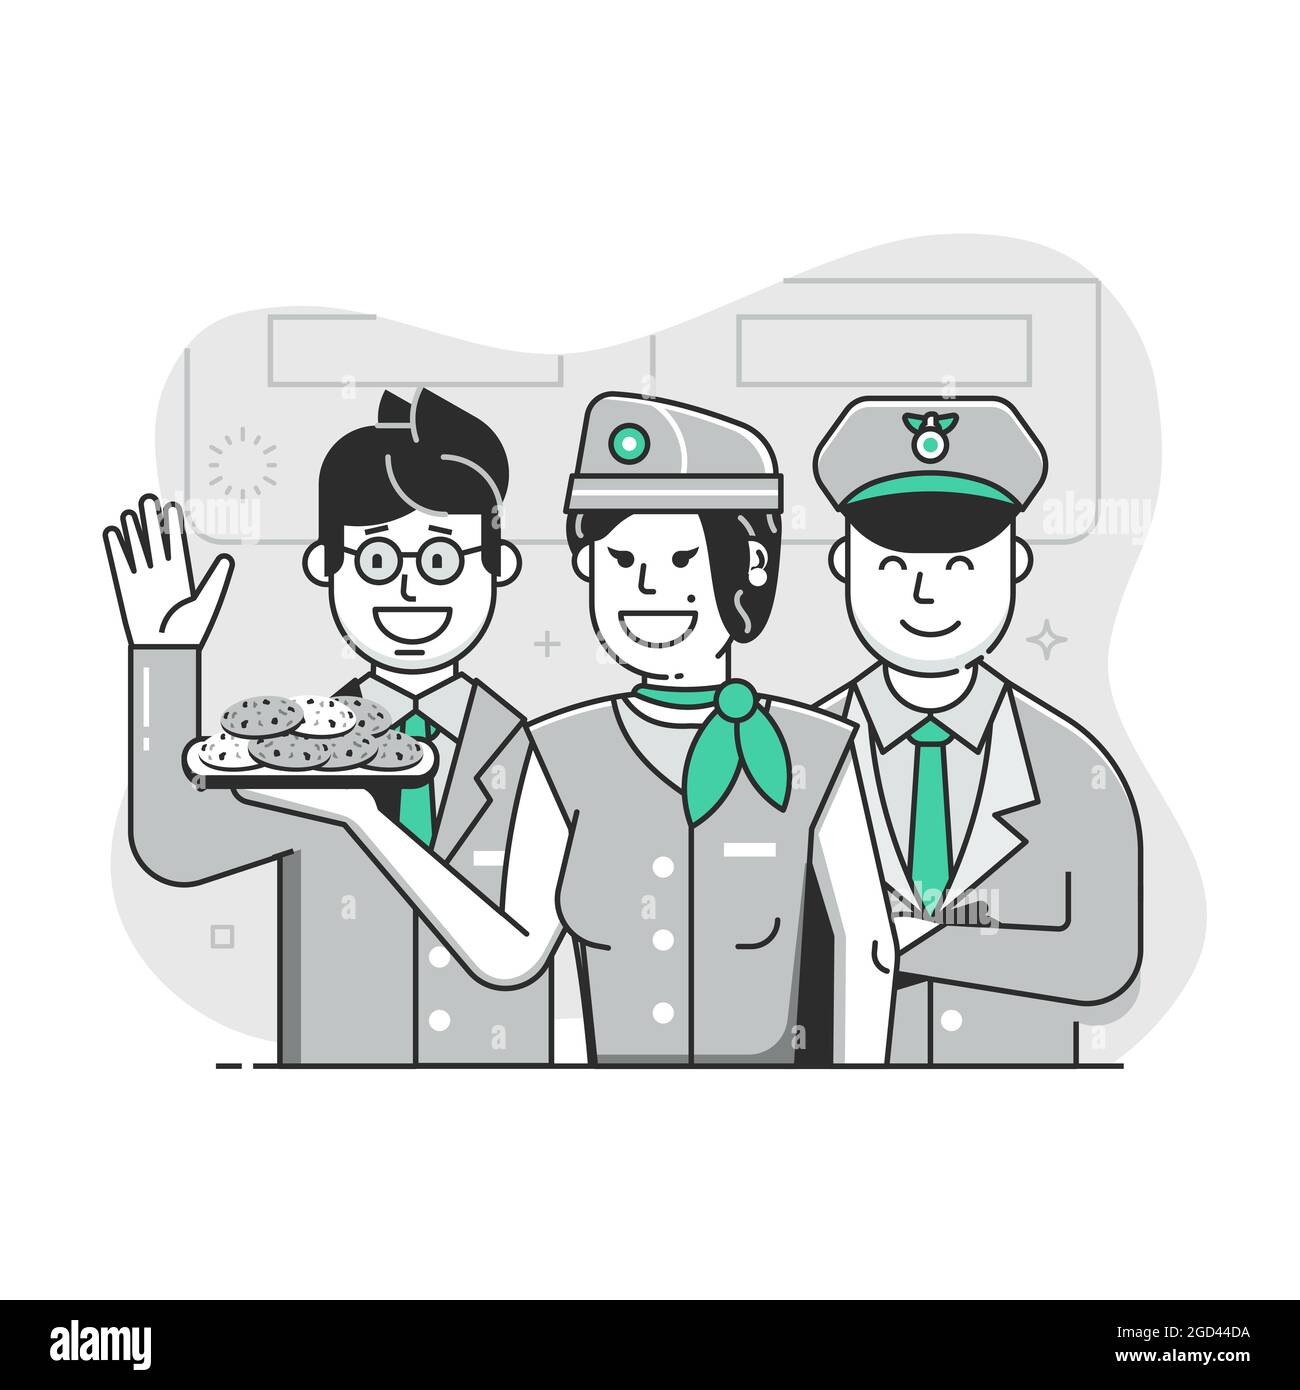 Welcome Aboard Flat Concept with Cabin Crew Stock Vector